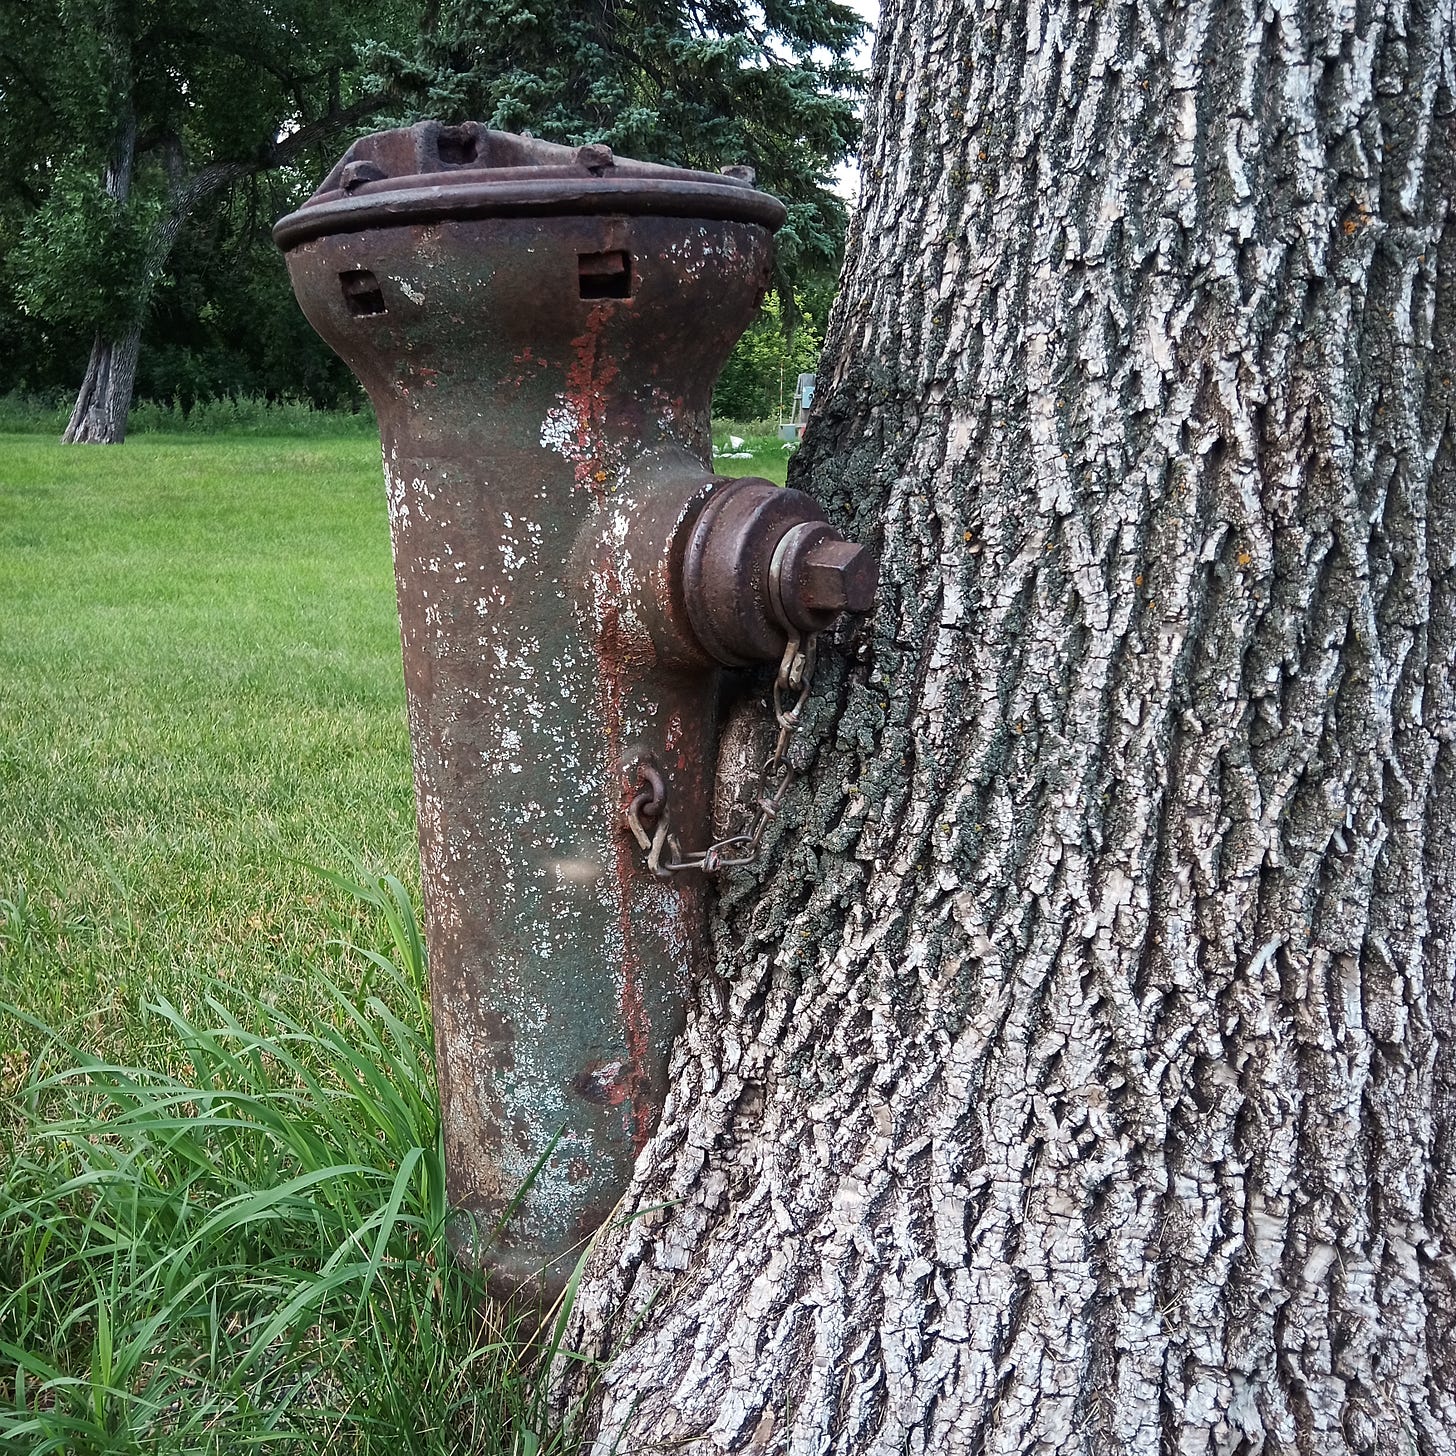 A fire hydrant embedded in a tree